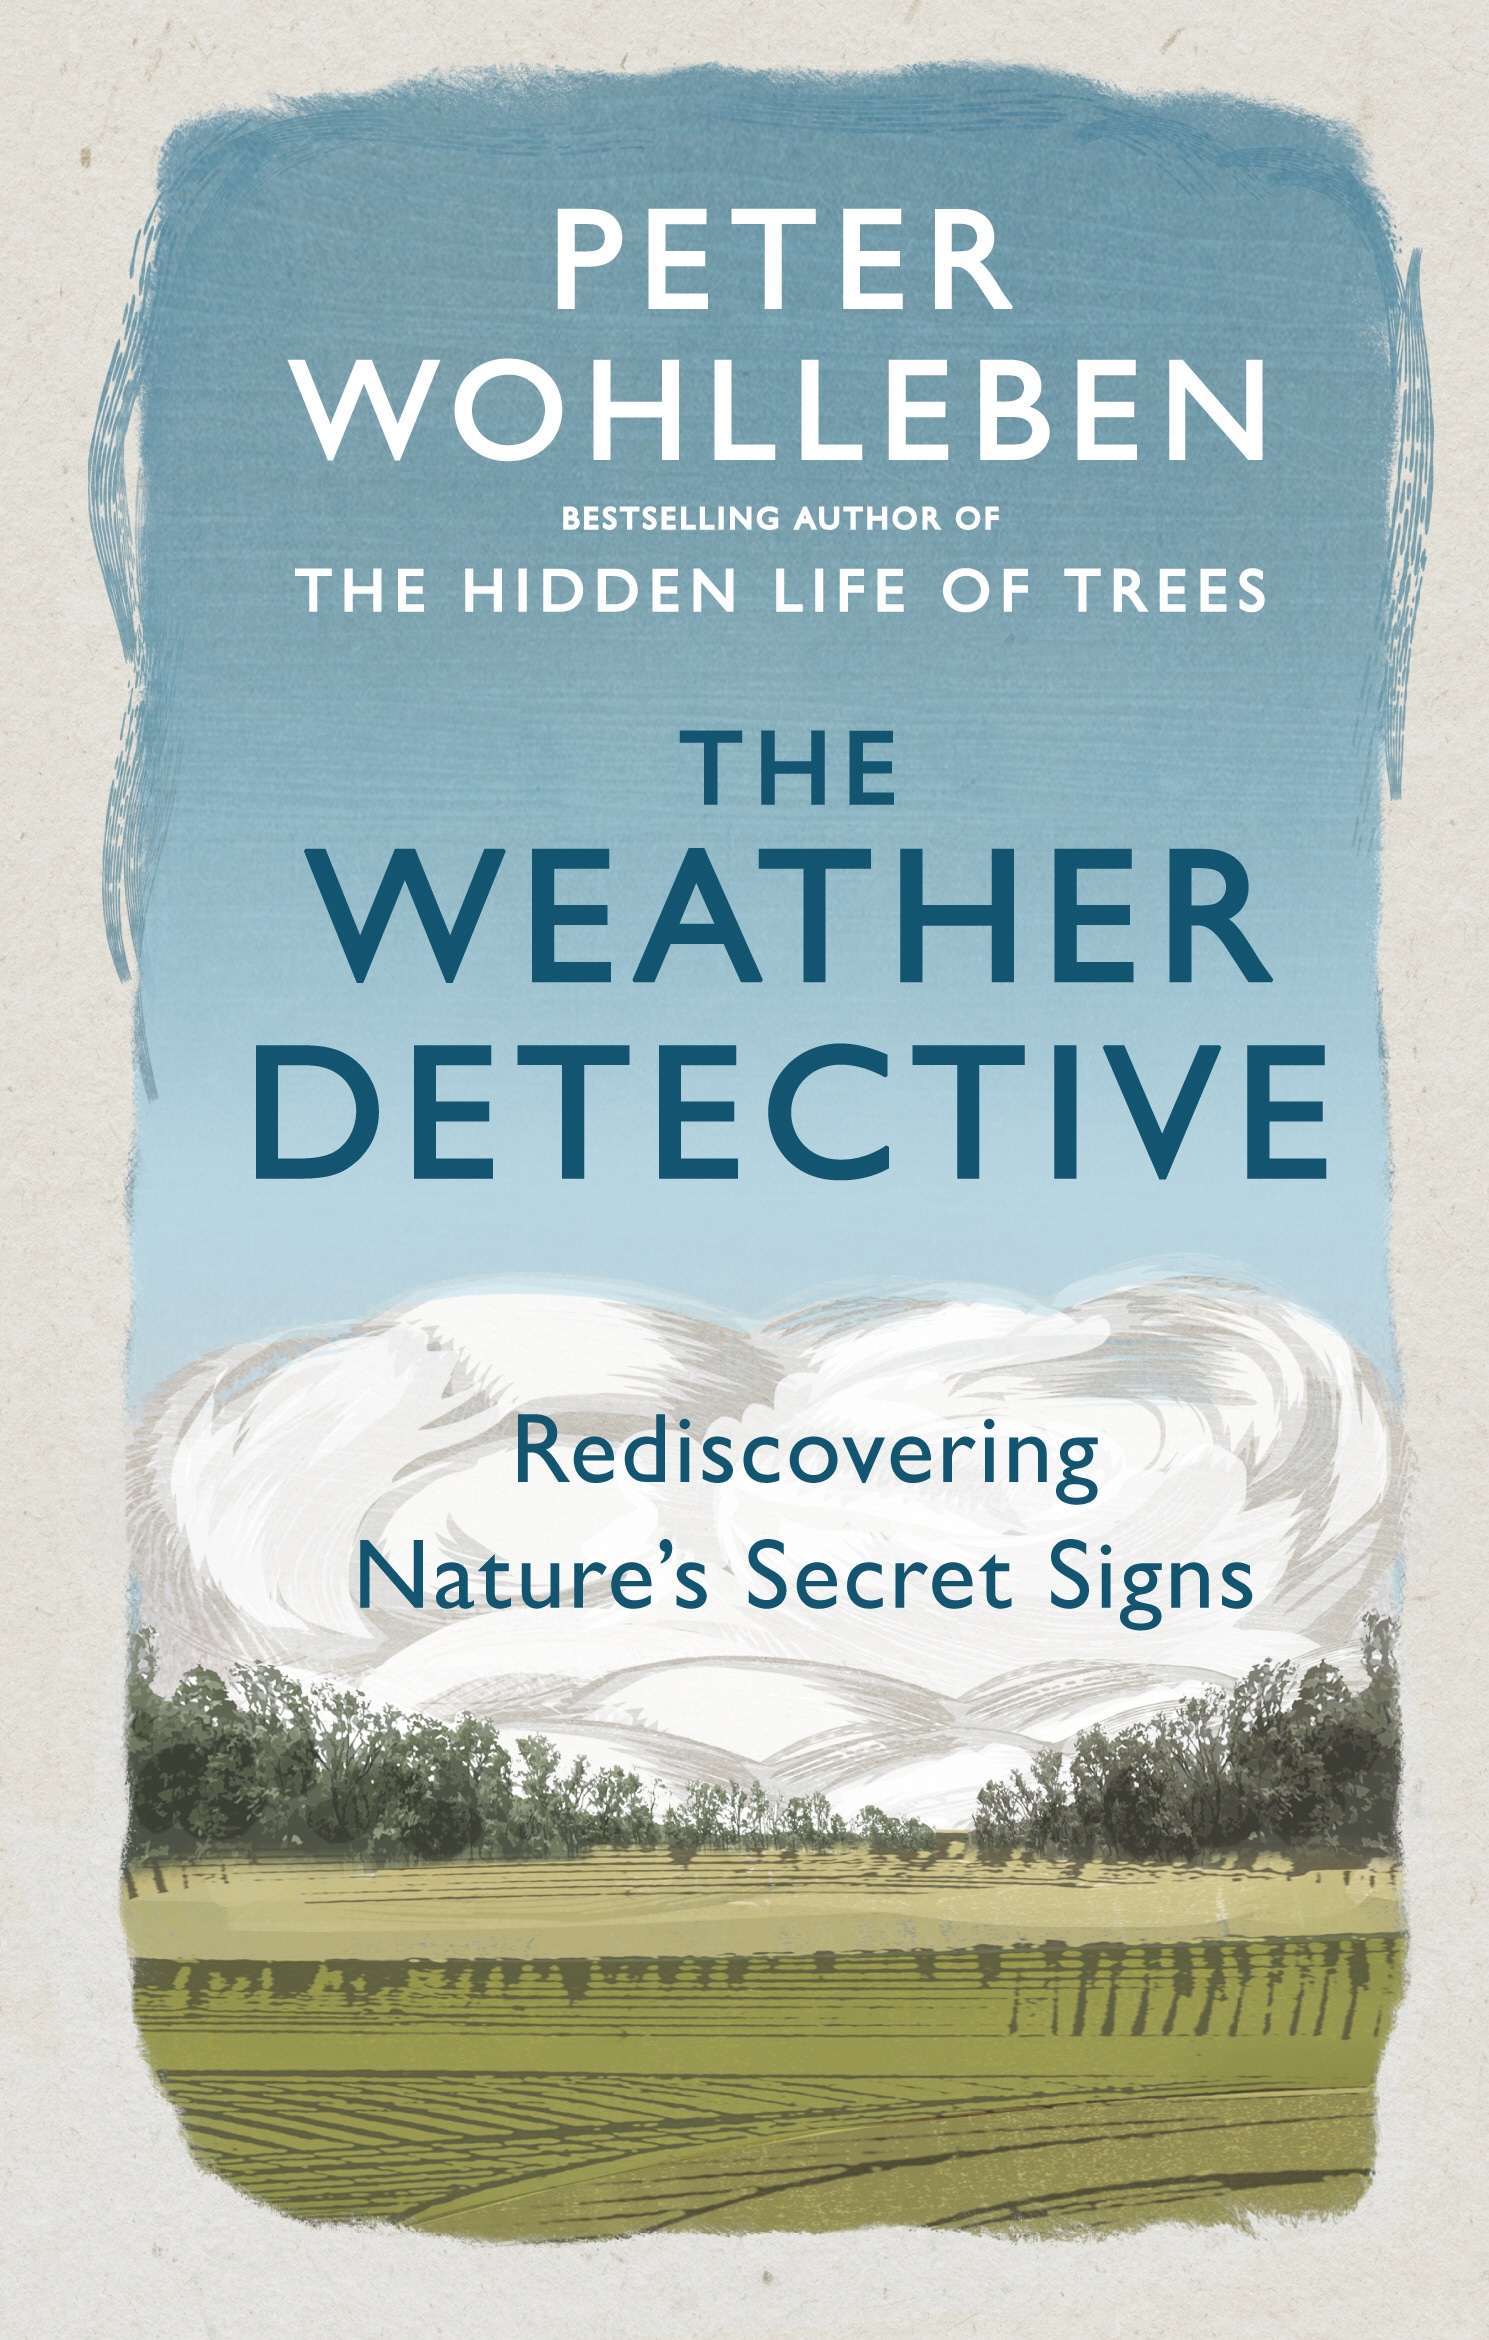 Book “The Weather Detective” by Peter Wohlleben — April 25, 2019